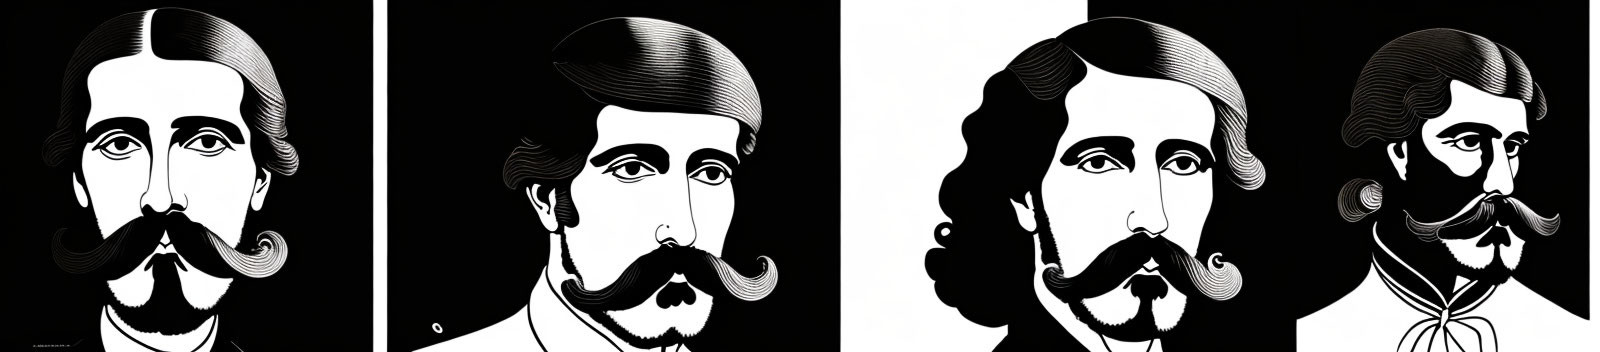 Four stylized black and white portraits of a man with distinct facial hair in various styles.